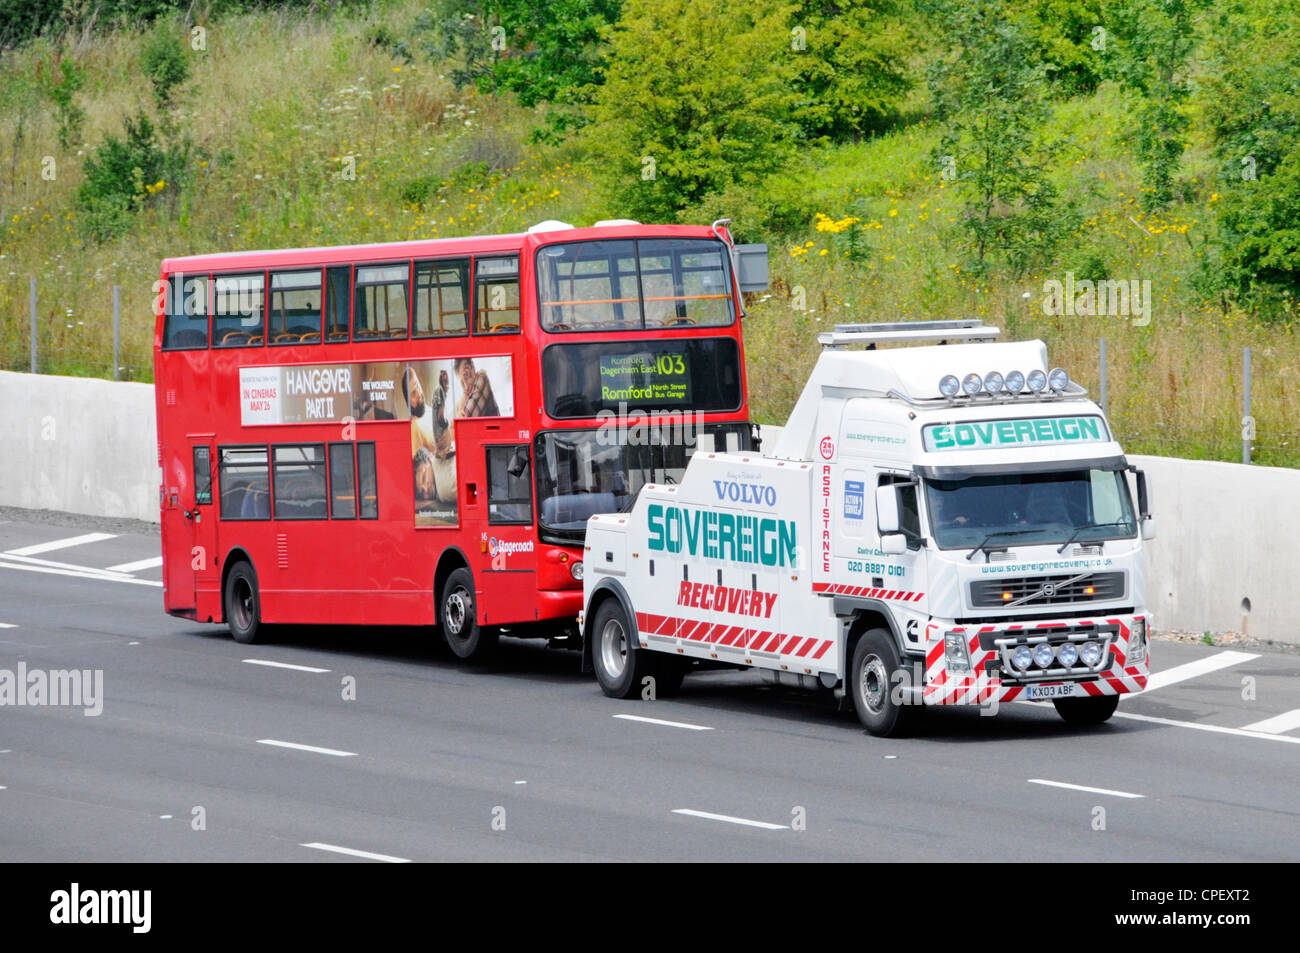 Stagecoach London double decker bus being towed by Volvo breakdown recovery truck Stock Photo